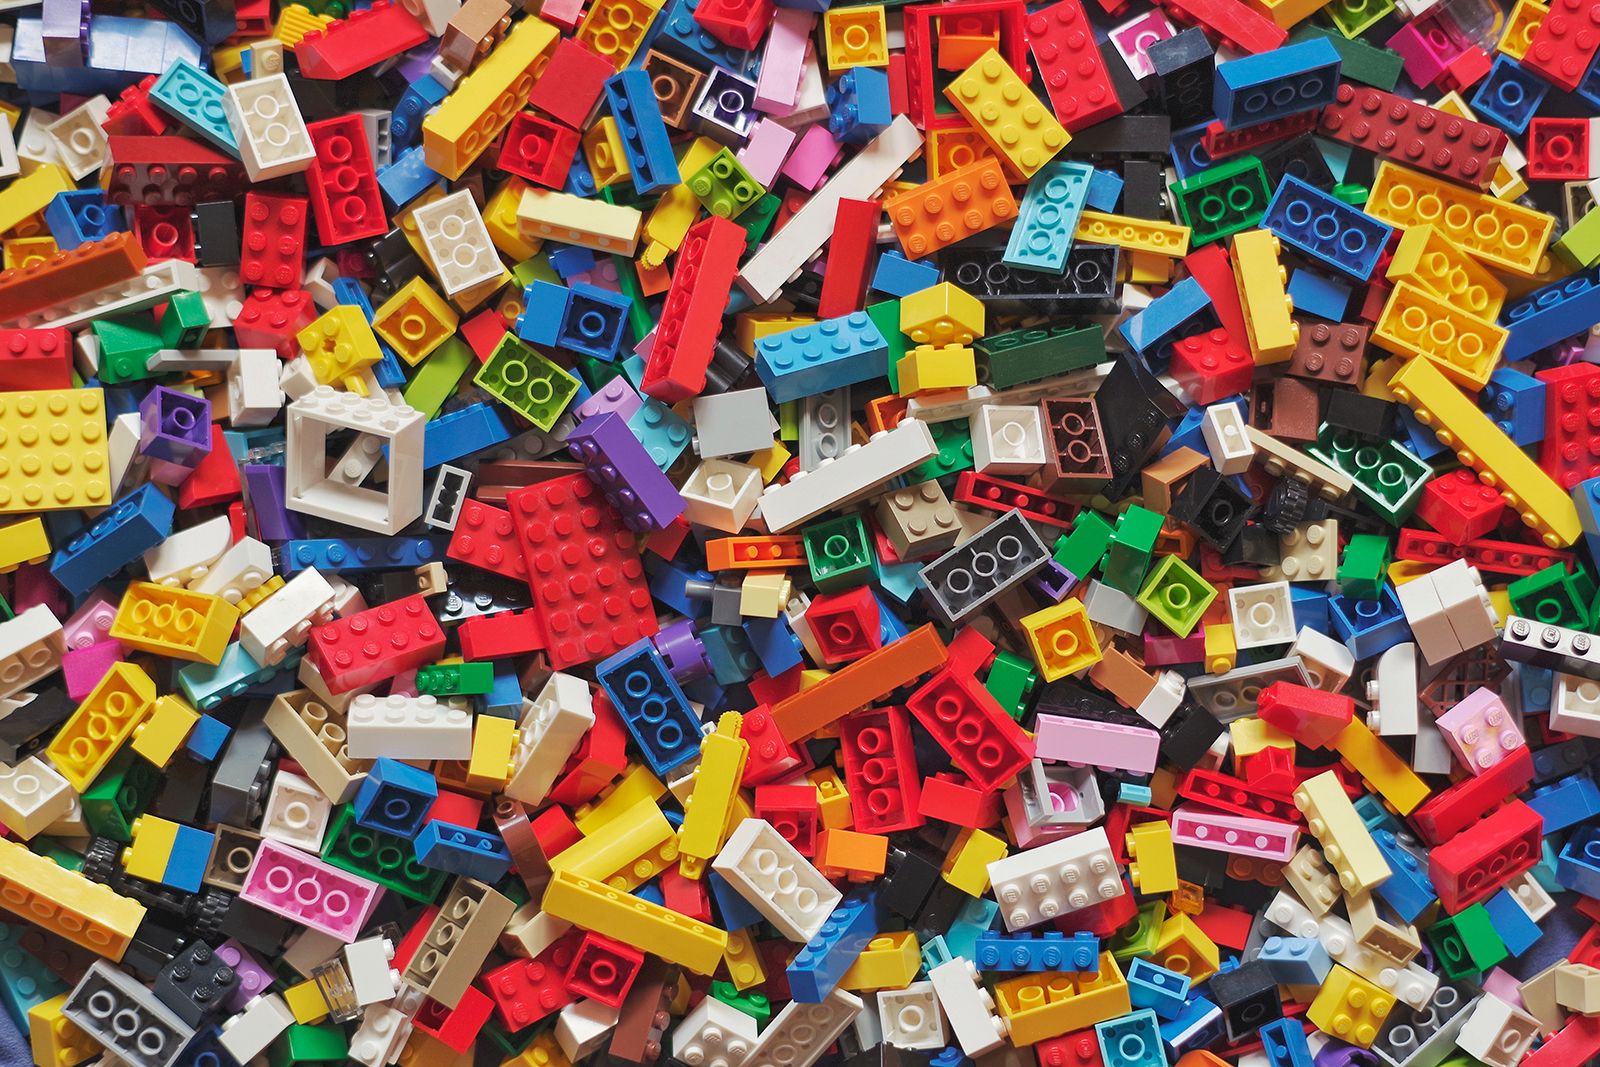 Lego unveils bricks made from recycled bottles photo 1